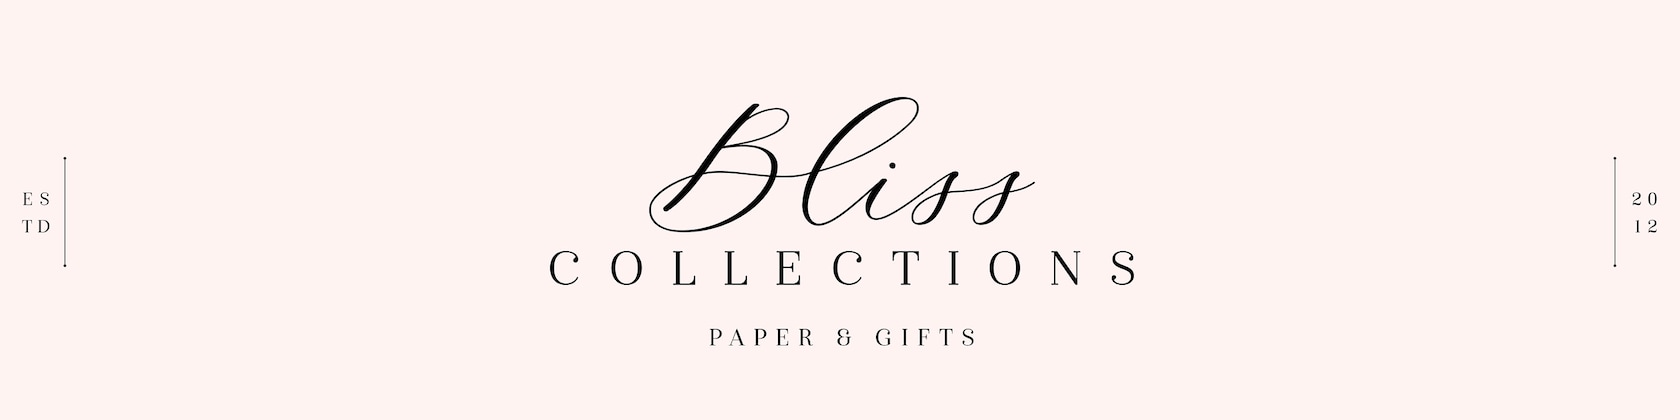 Bliss Collections Monthly Planner, You've Got This, Undated Desk Calendar  and Planner for Organizing and Scheduling Tasks, Productivity Tracker